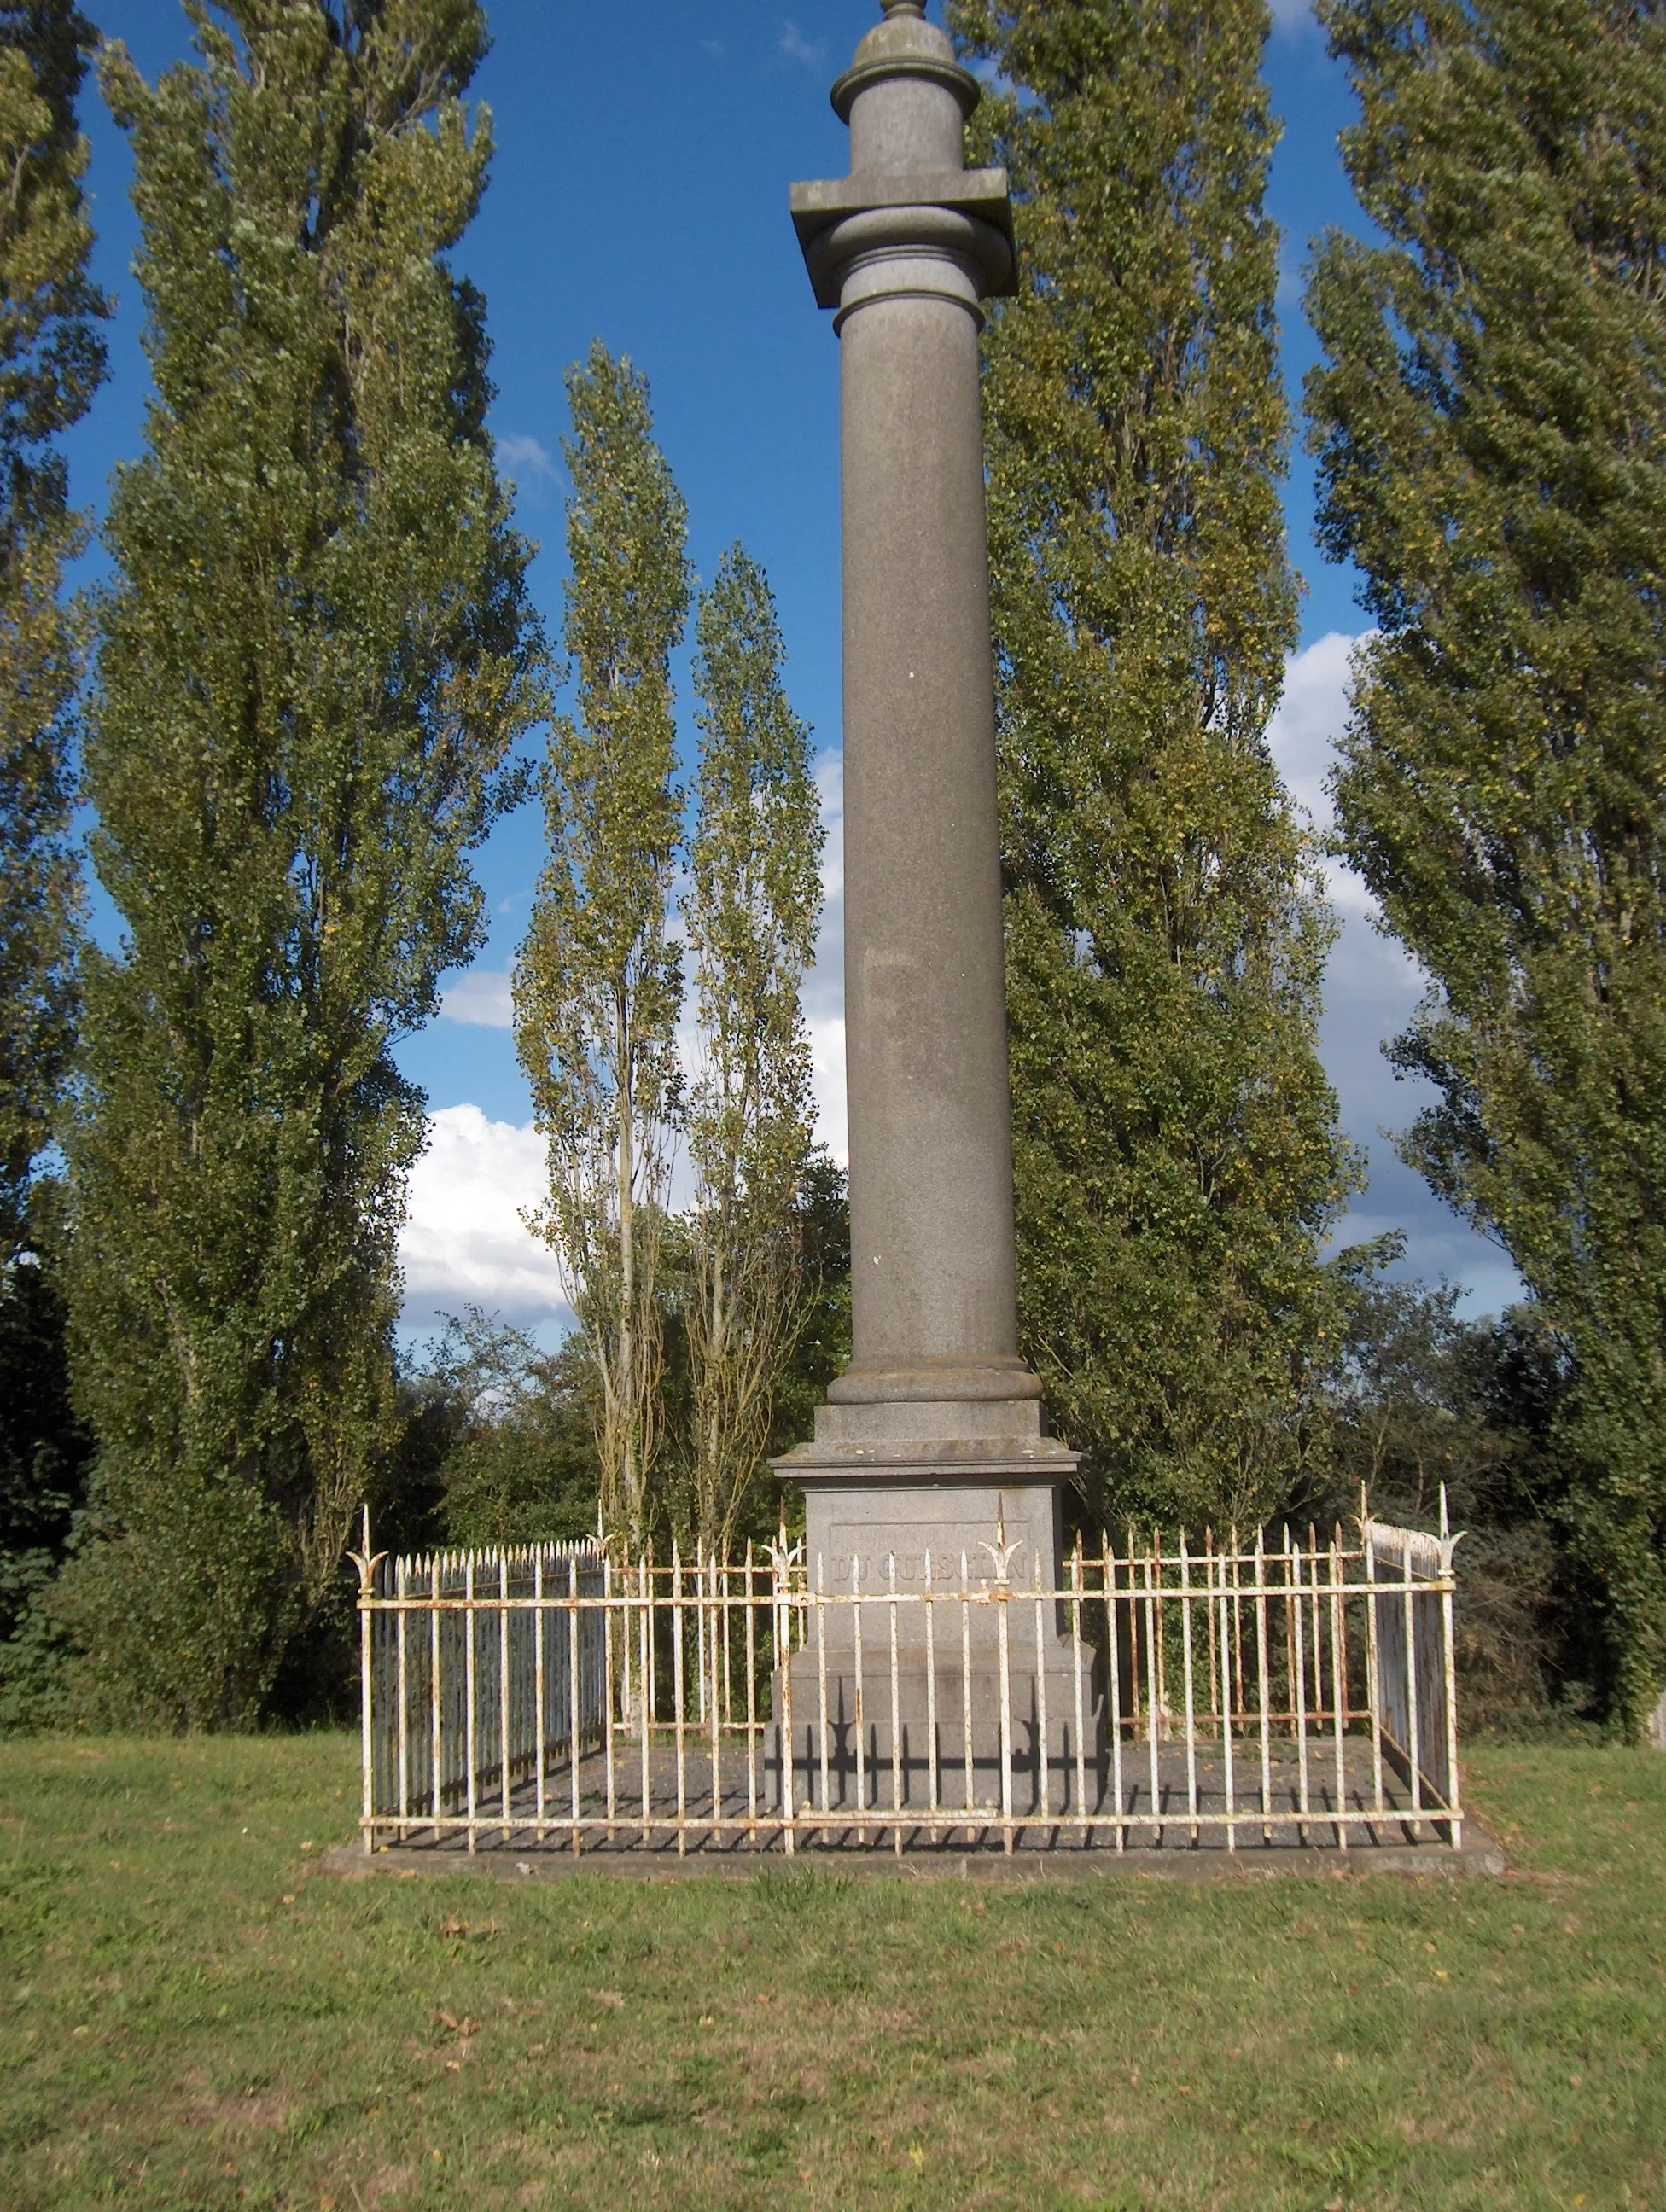 Photo showing: A column in memory of Bertrand du Guesclin in Broons, France.